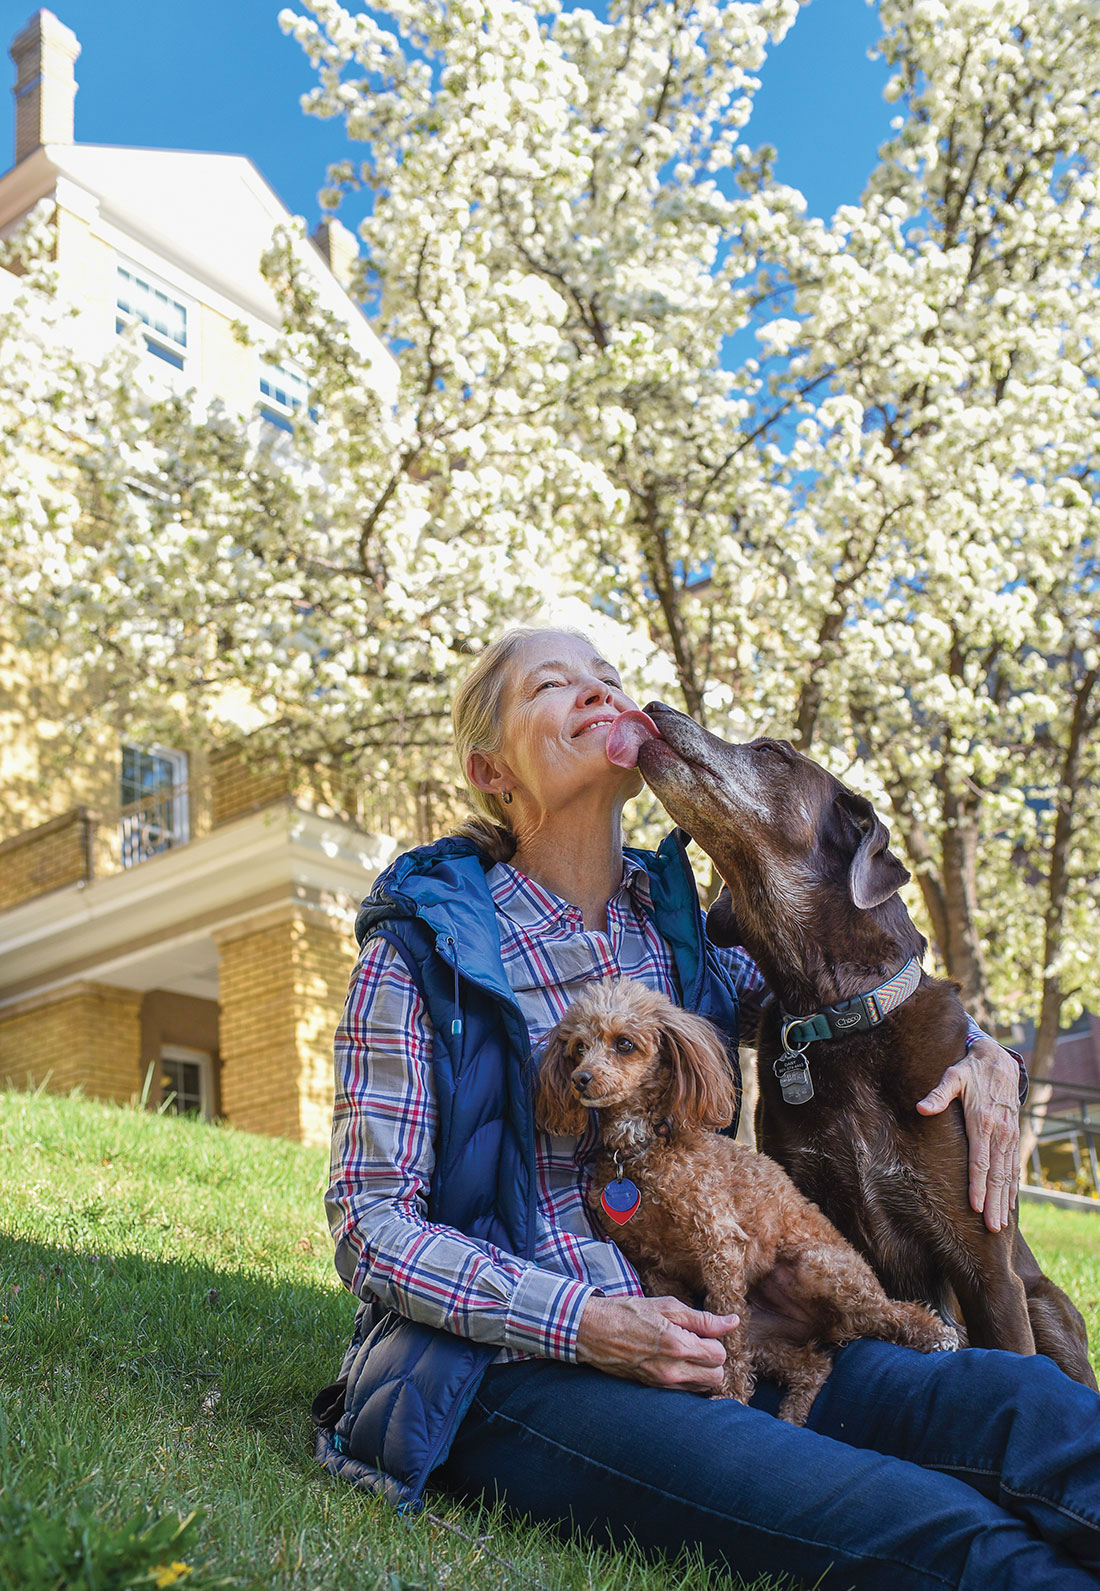 Math professor Carolyn Connell and her dogs Lucy and Daisy